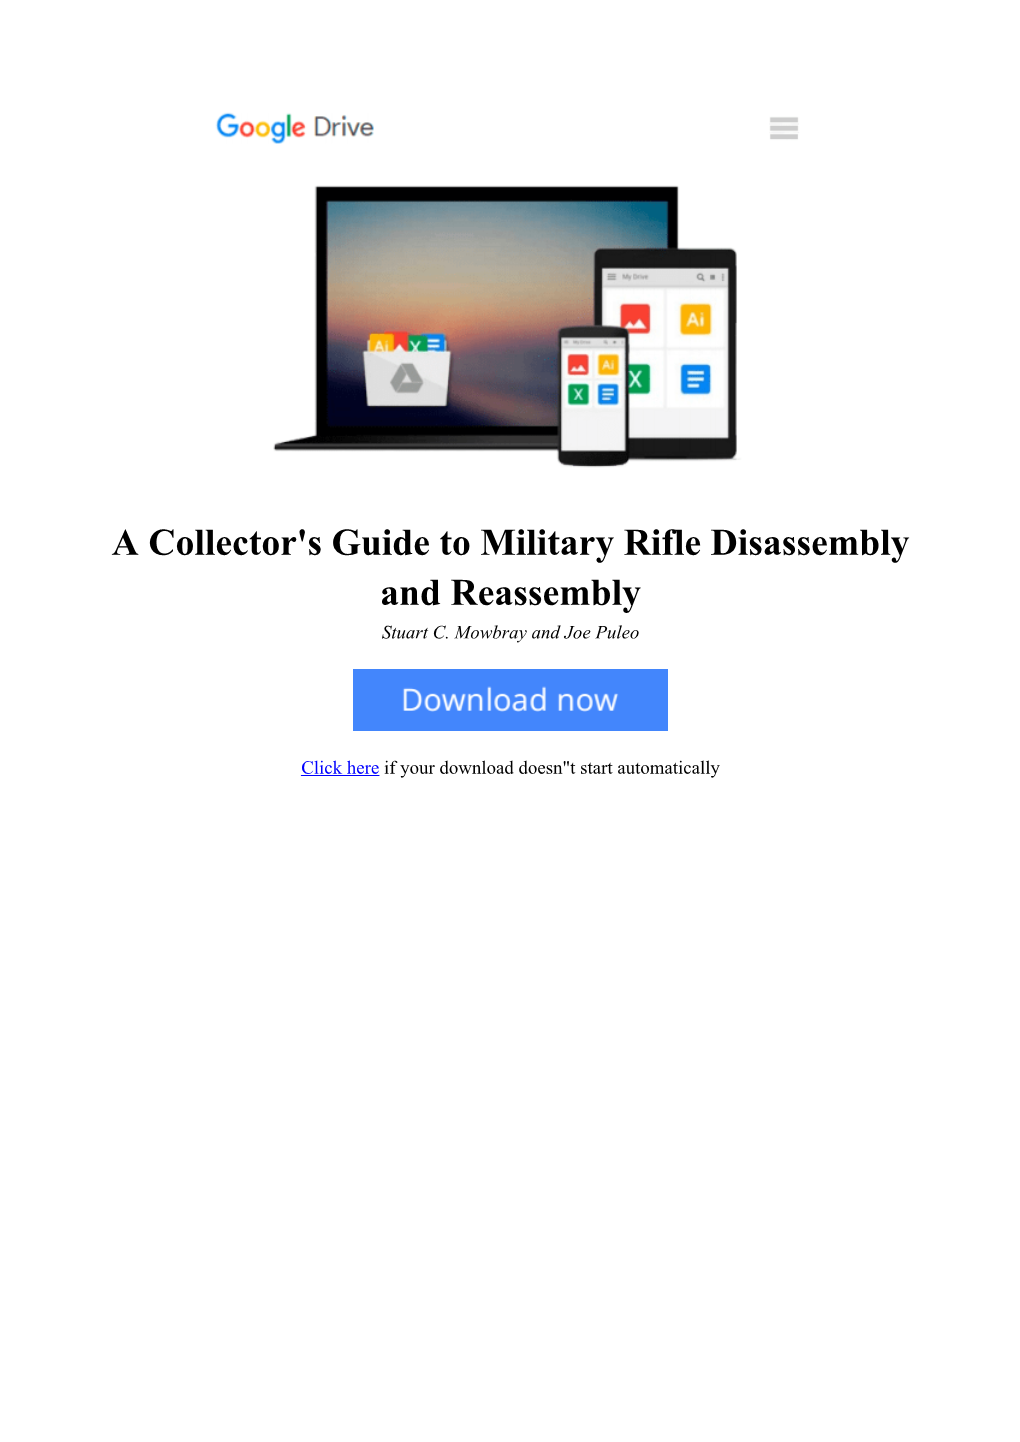 A Collector's Guide to Military Rifle Disassembly and Reassembly by Stuart C